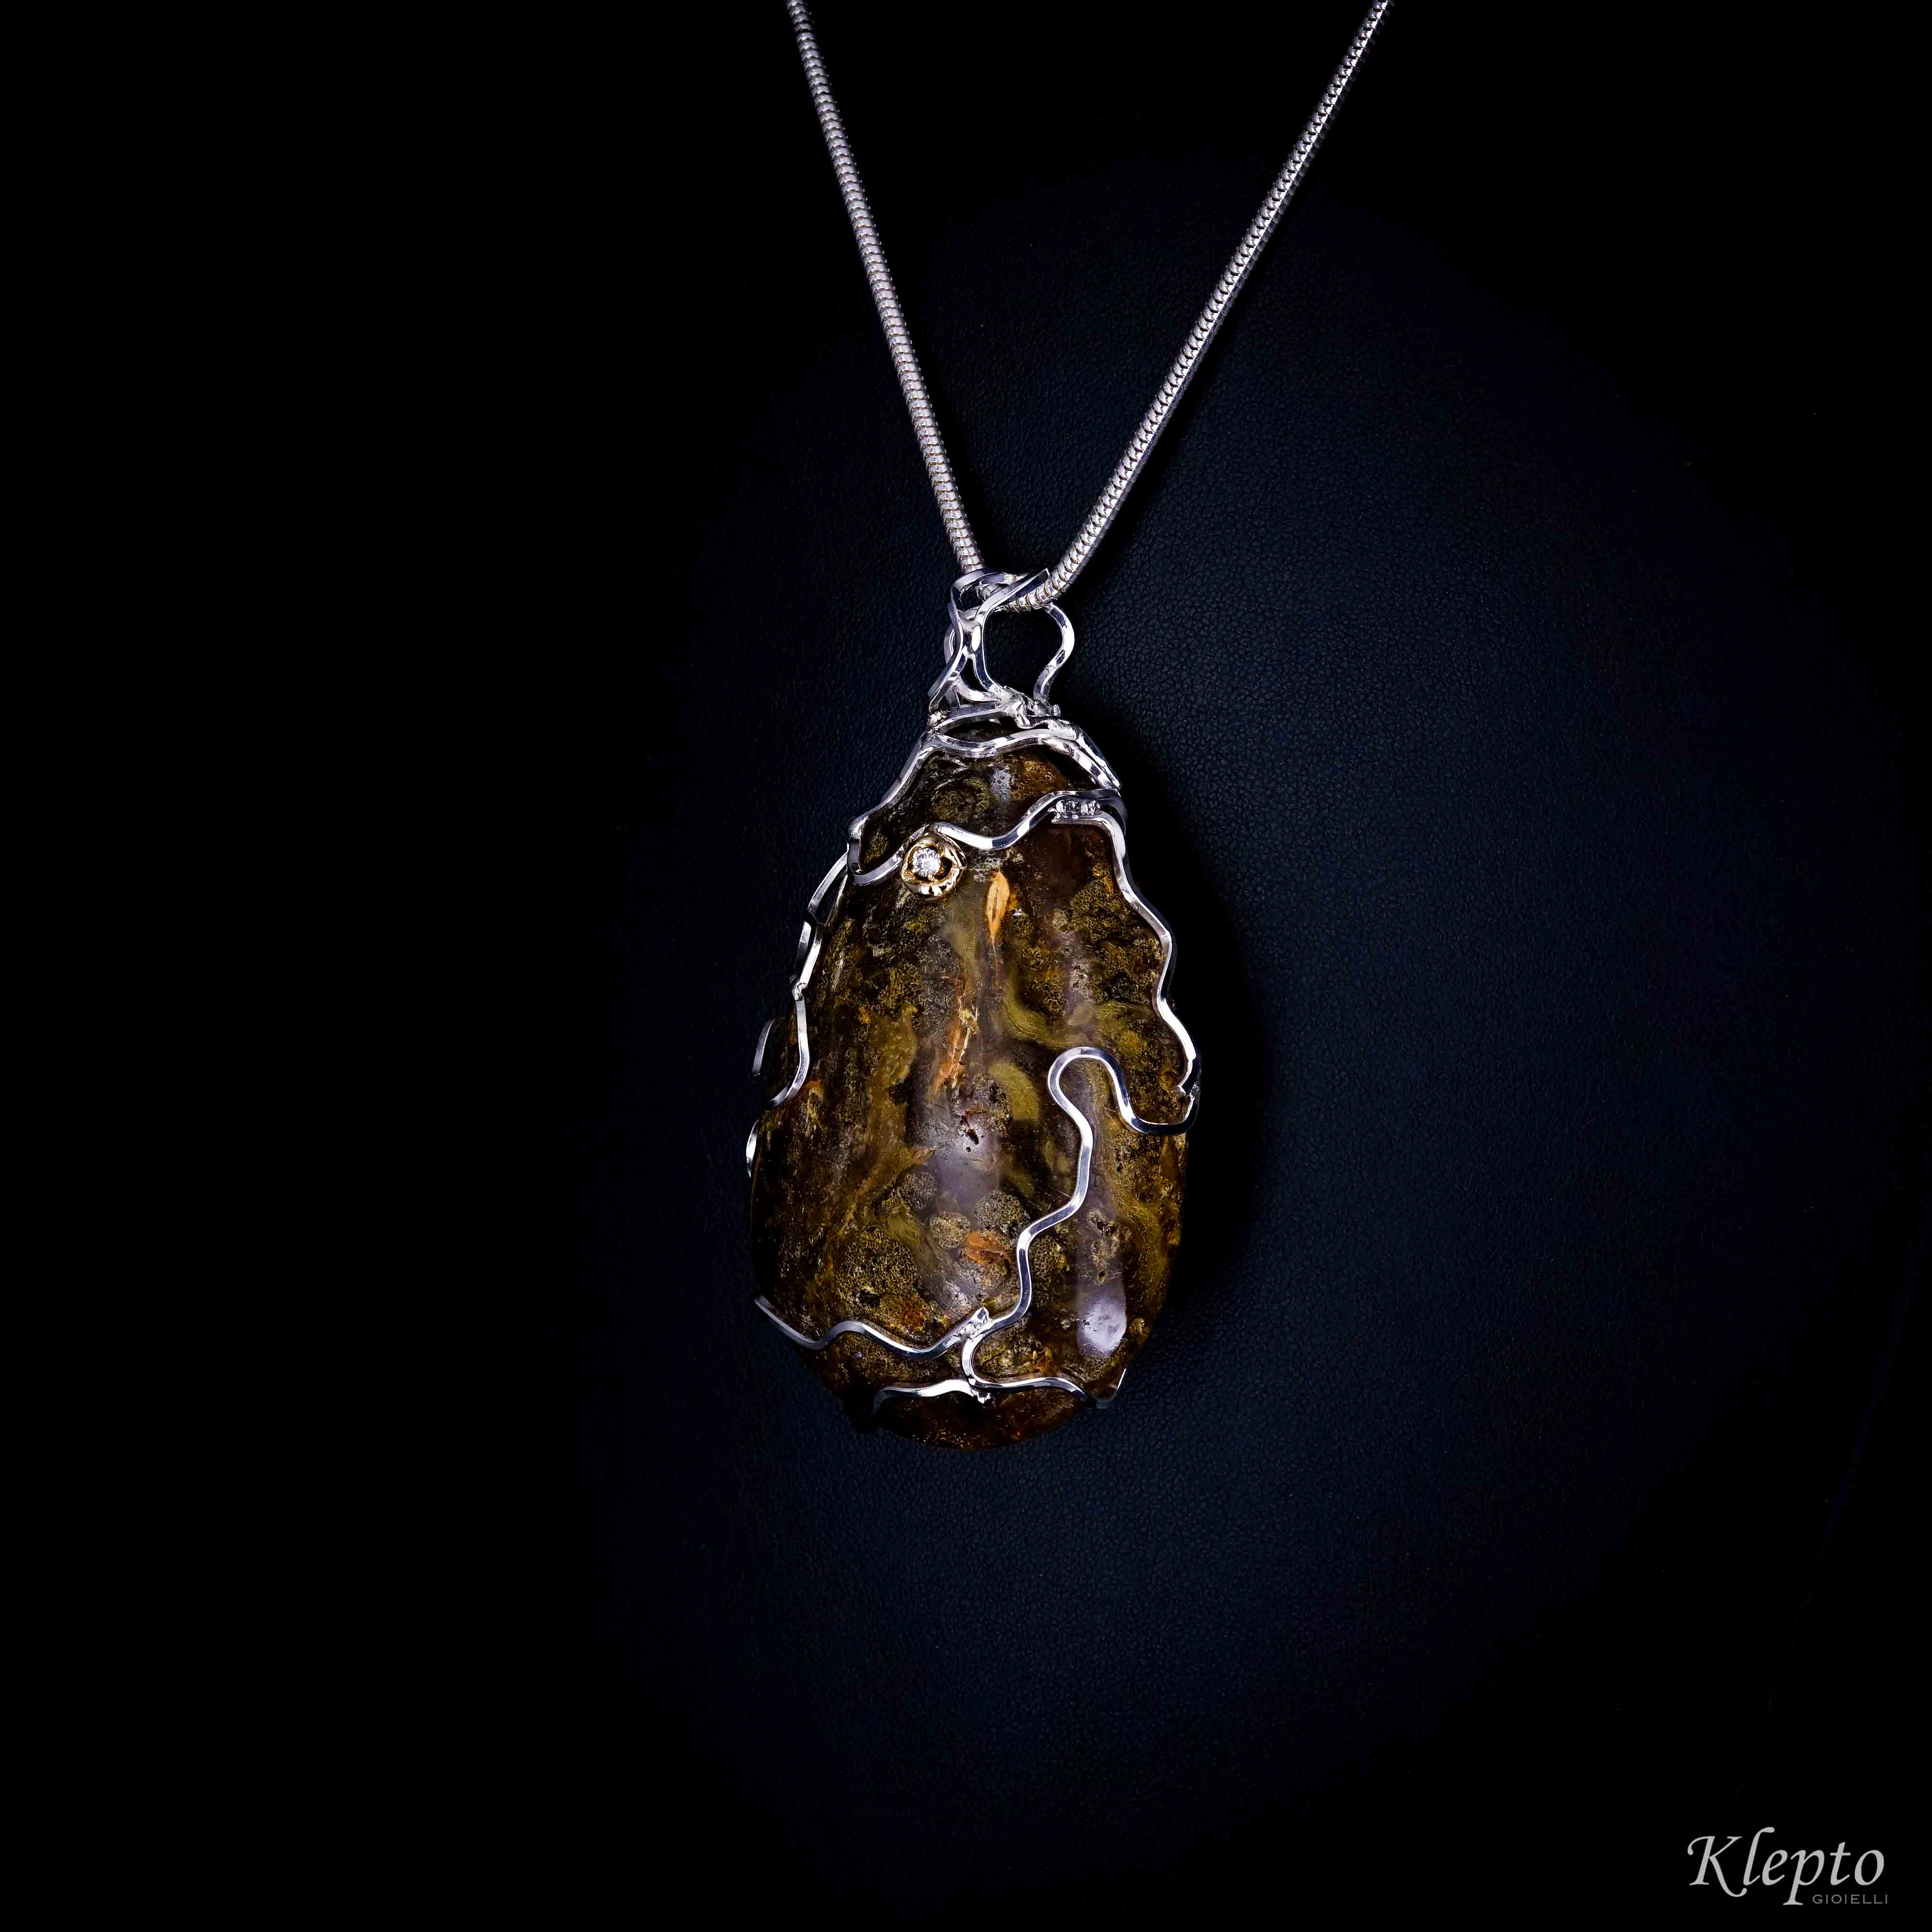 Pendant in Silnova® Silver and yellow gold with Dominican Amber